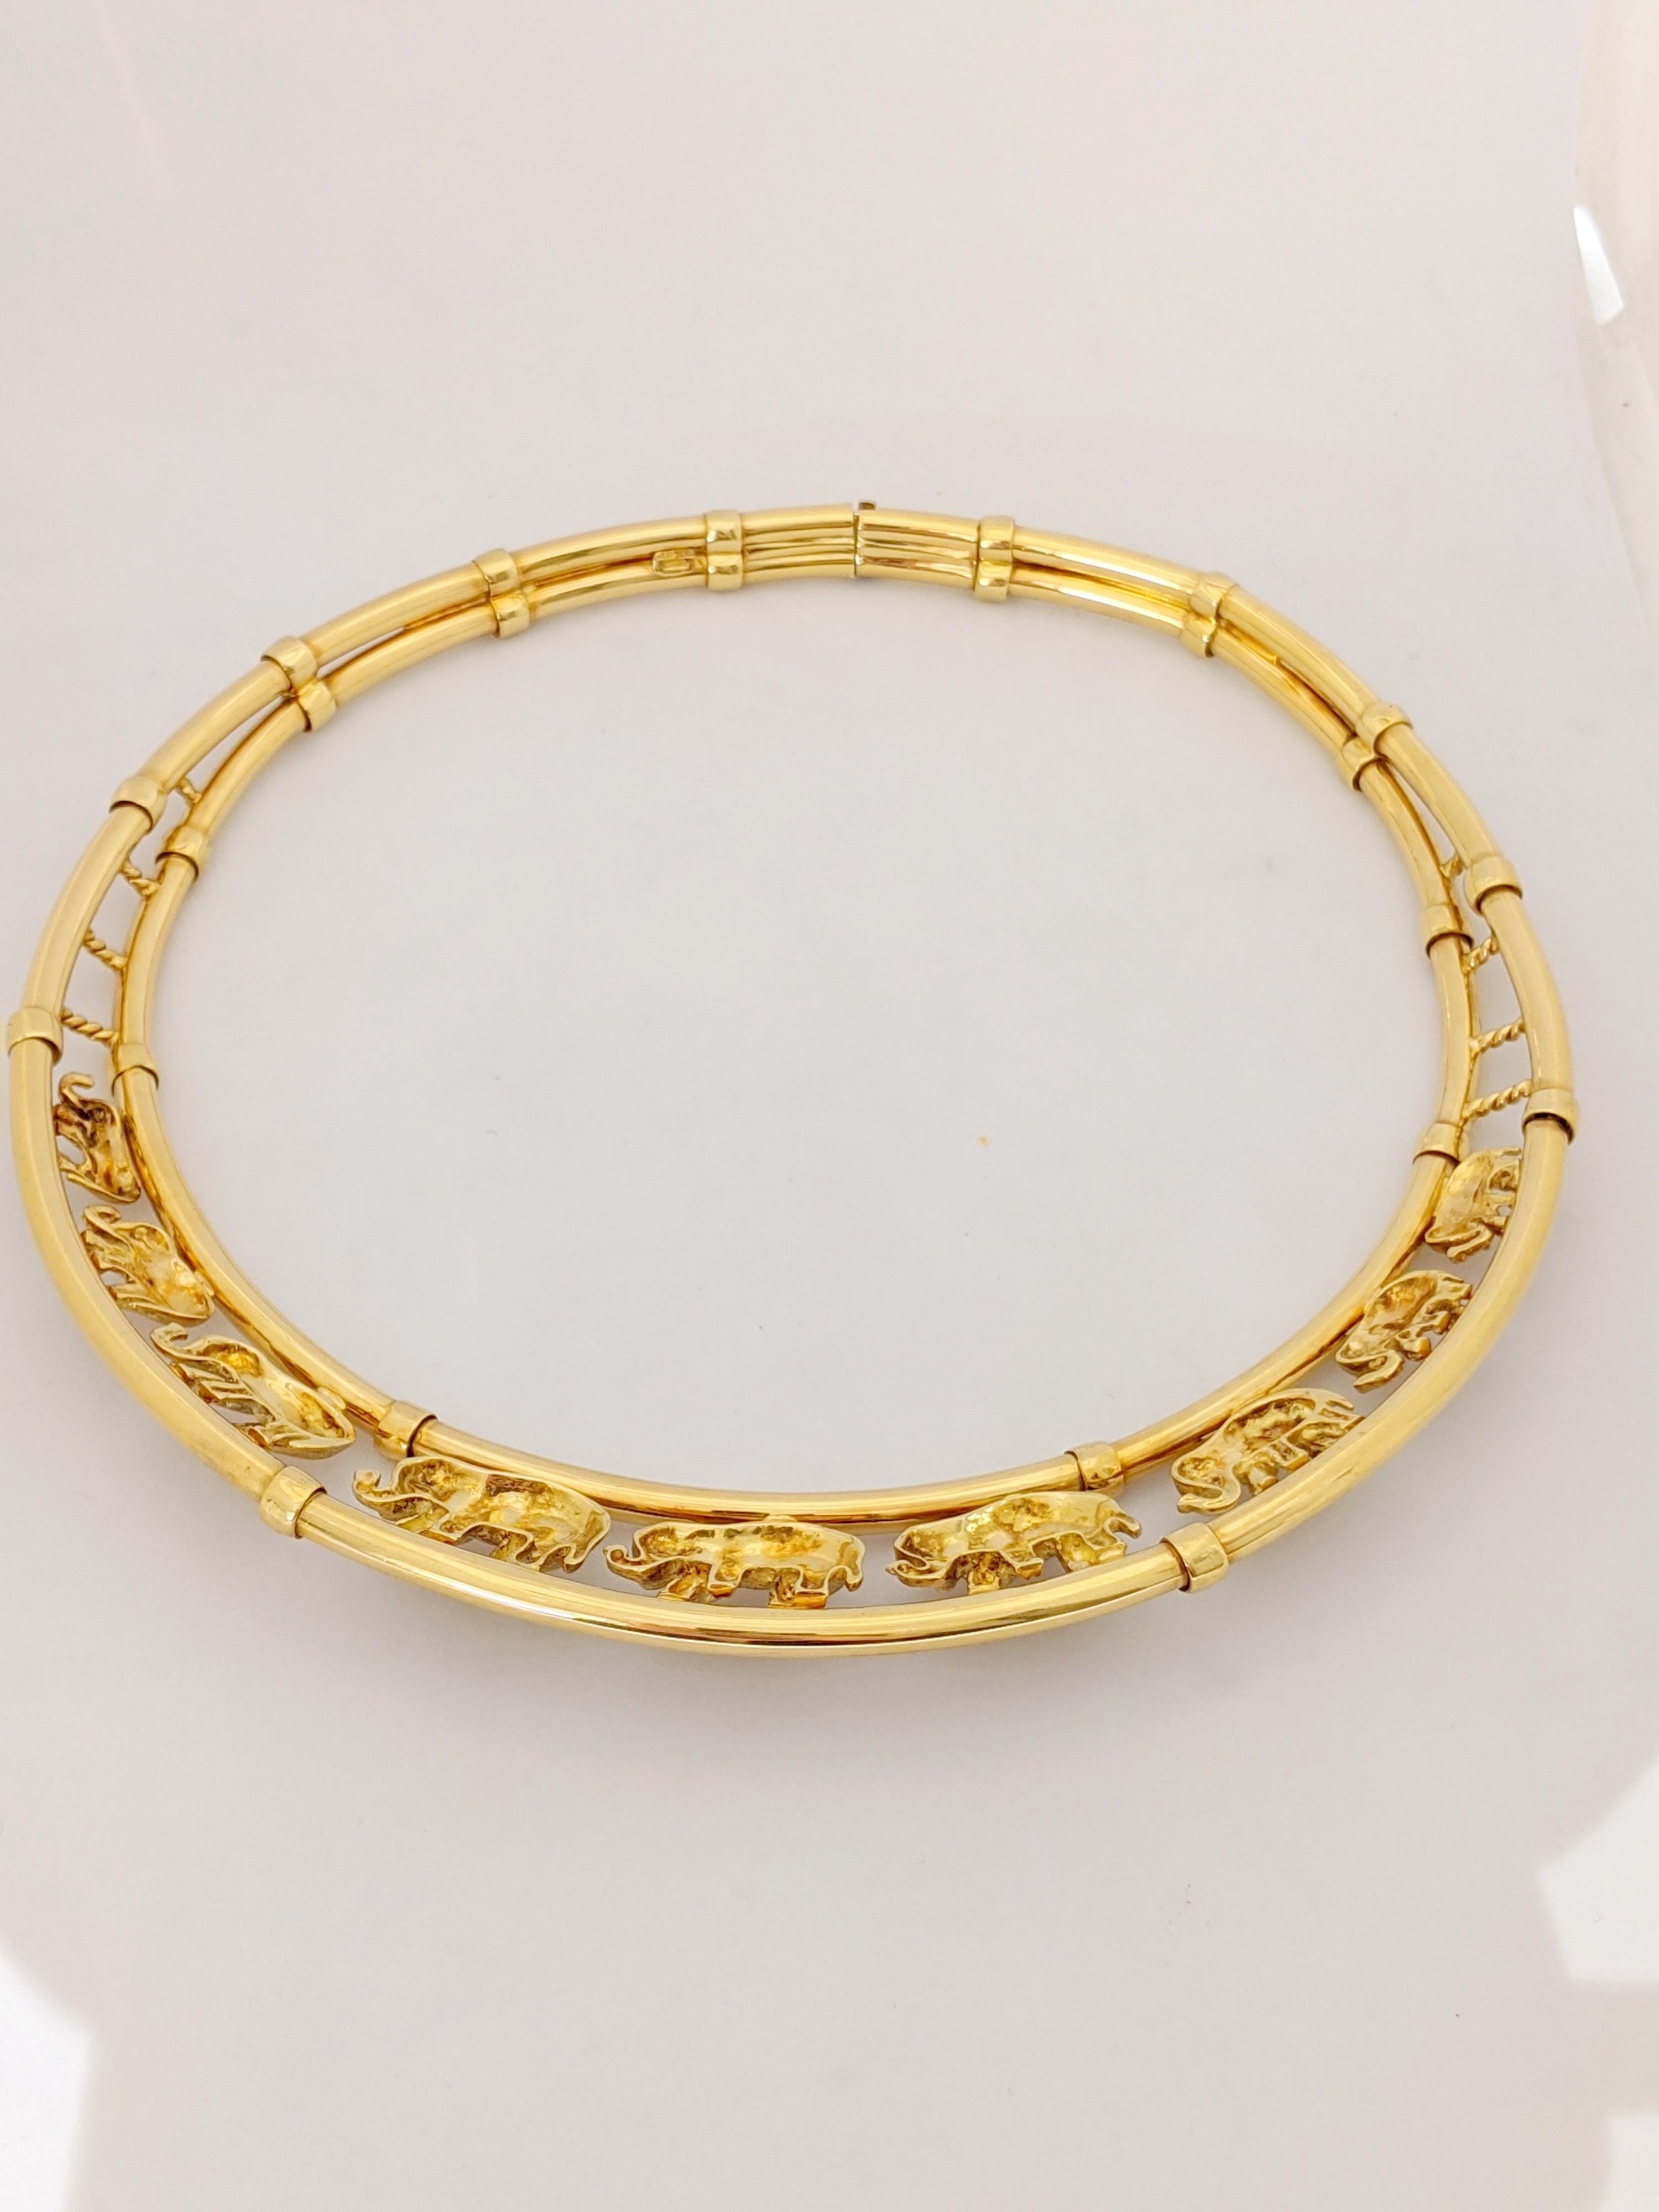 Classic collar necklace from Roberto Coin of Italy.
Nine graduating elephants, each with a round brilliant Diamond eye are the centerpiece of this 18 karat yellow gold collar. The elephants have their noses up which is symbolic of 